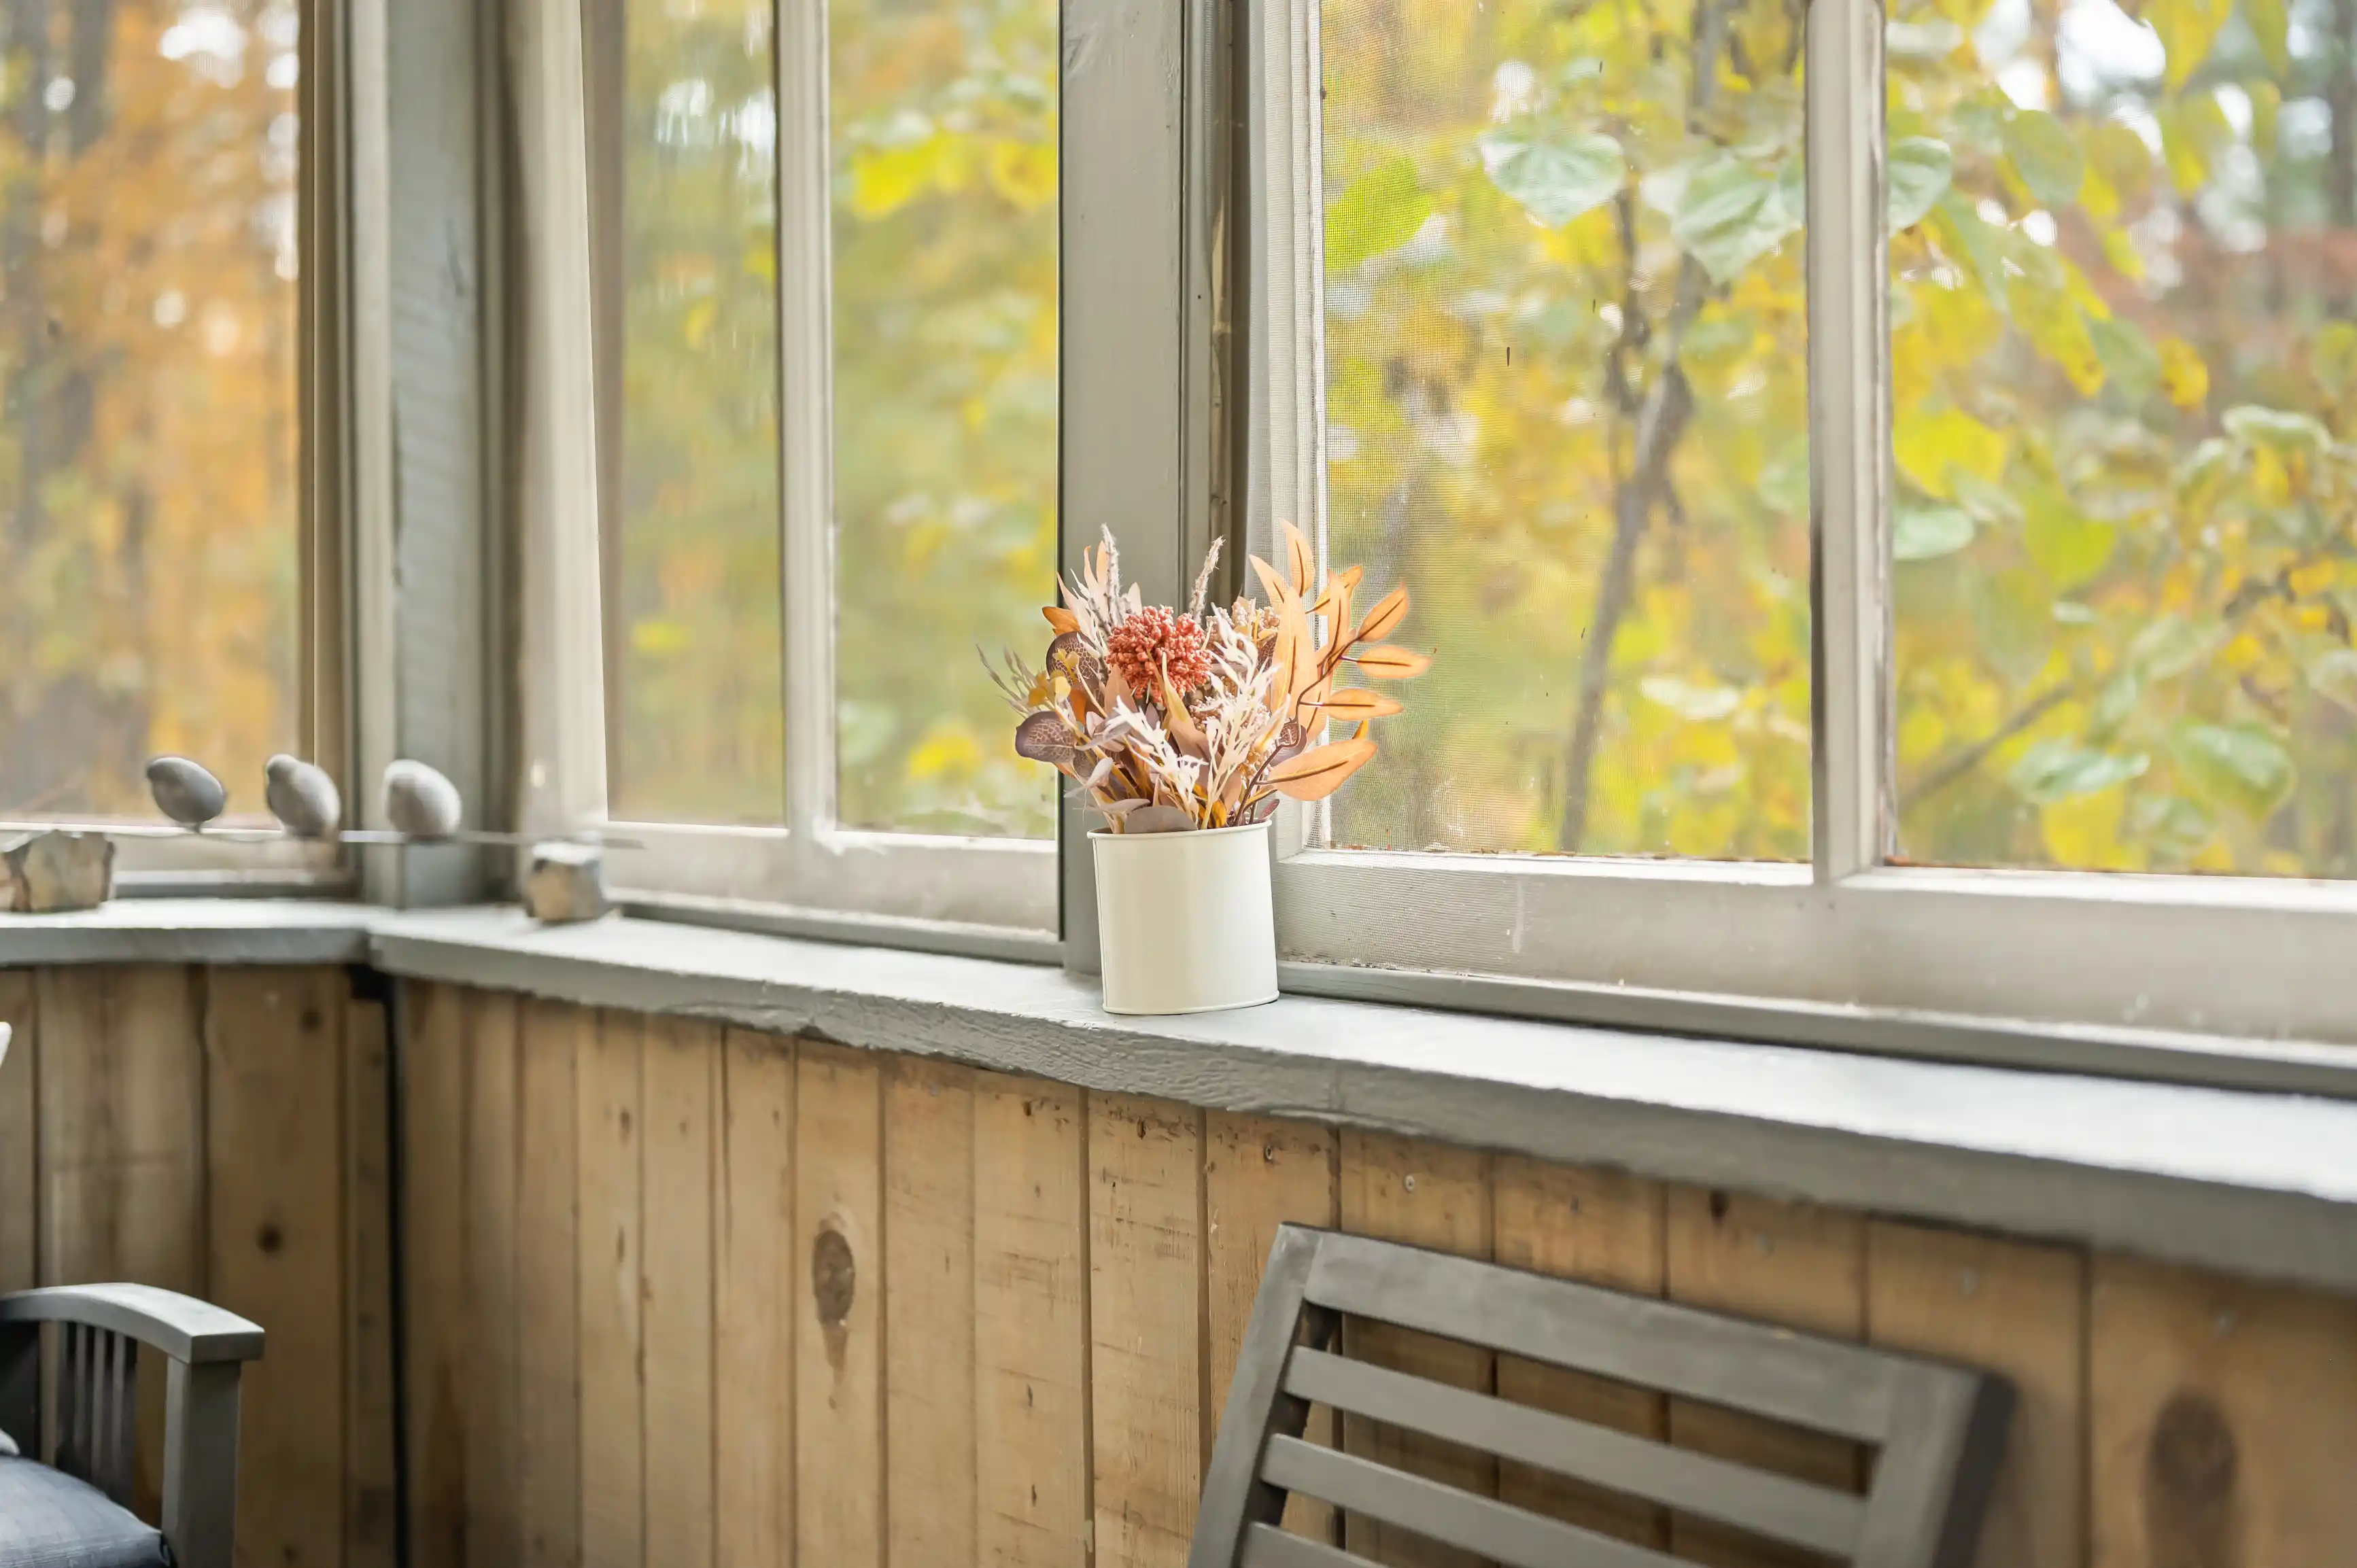 A cozy window nook with a wooden sill, a white vase with dried flowers, and a view of autumn foliage outside.